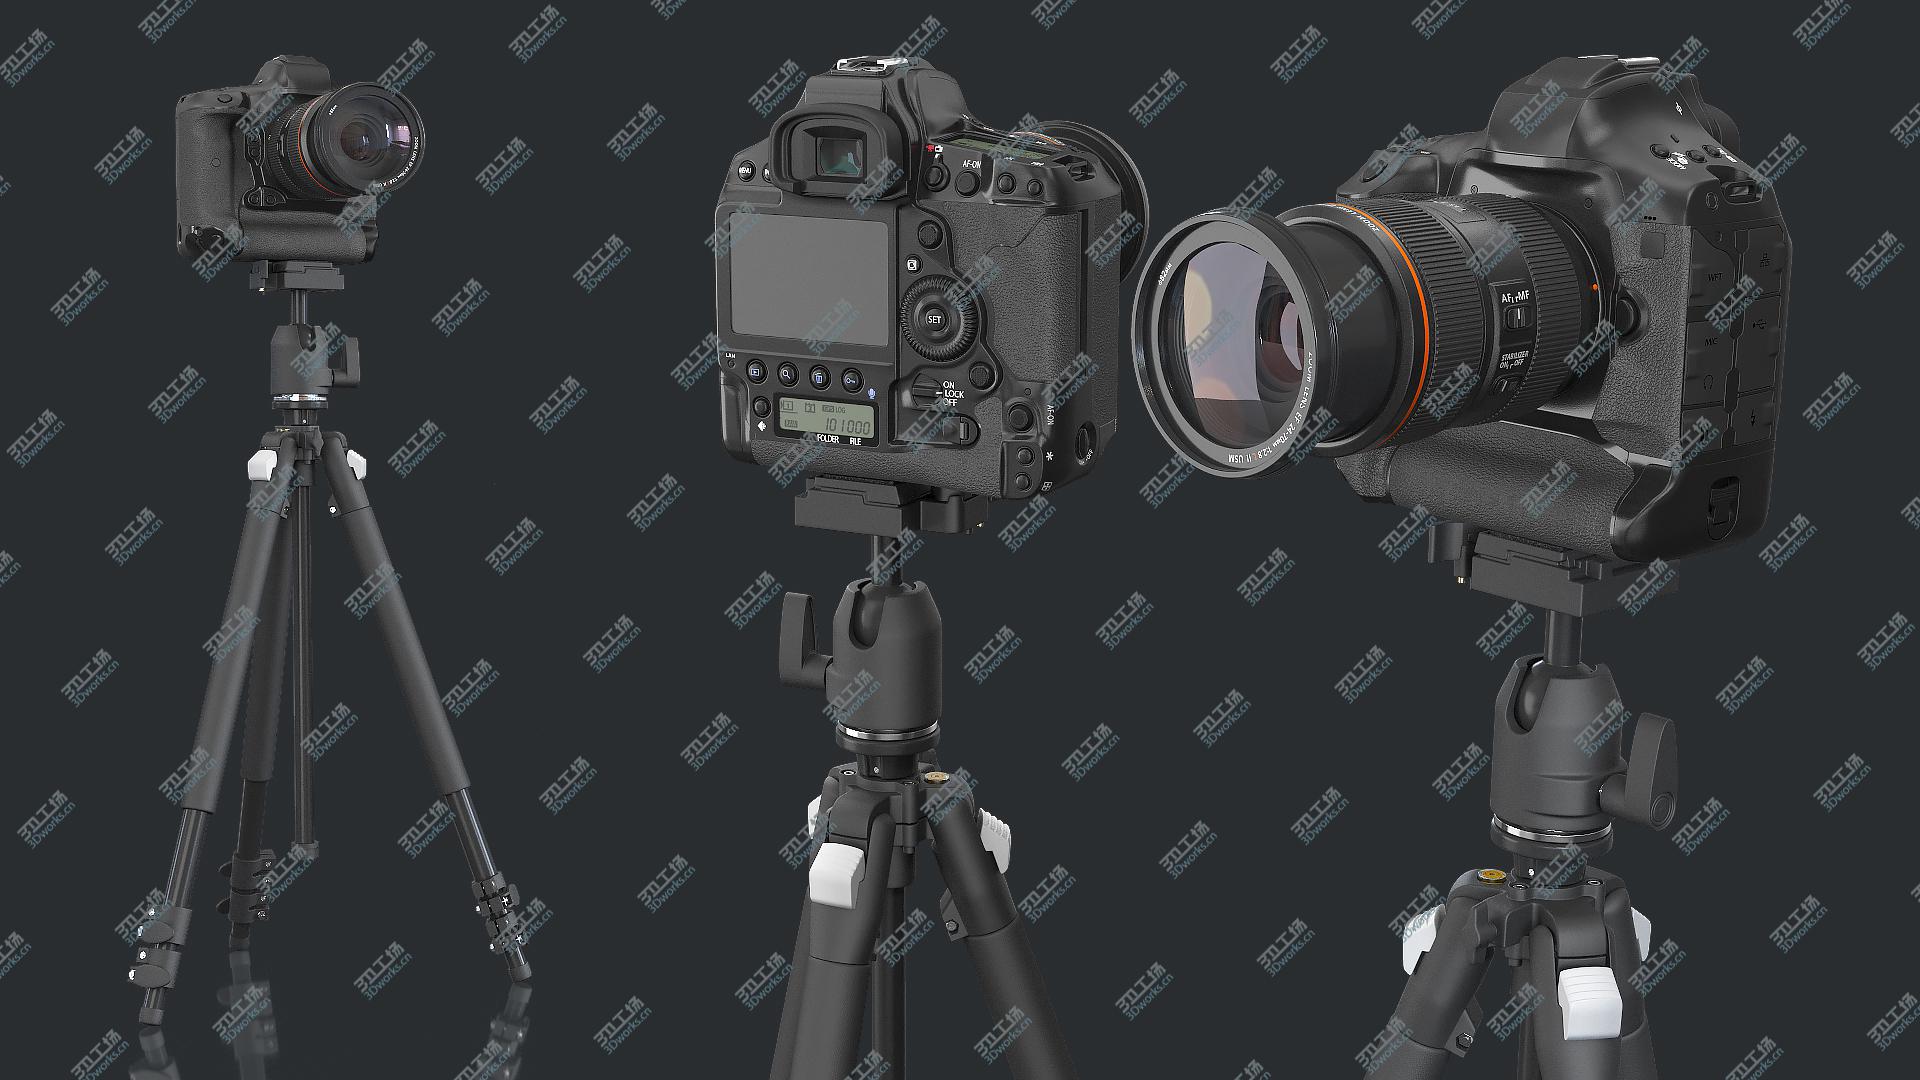 images/goods_img/20210319/DSLR Camera with Zoom on Tripod 3D model/4.jpg